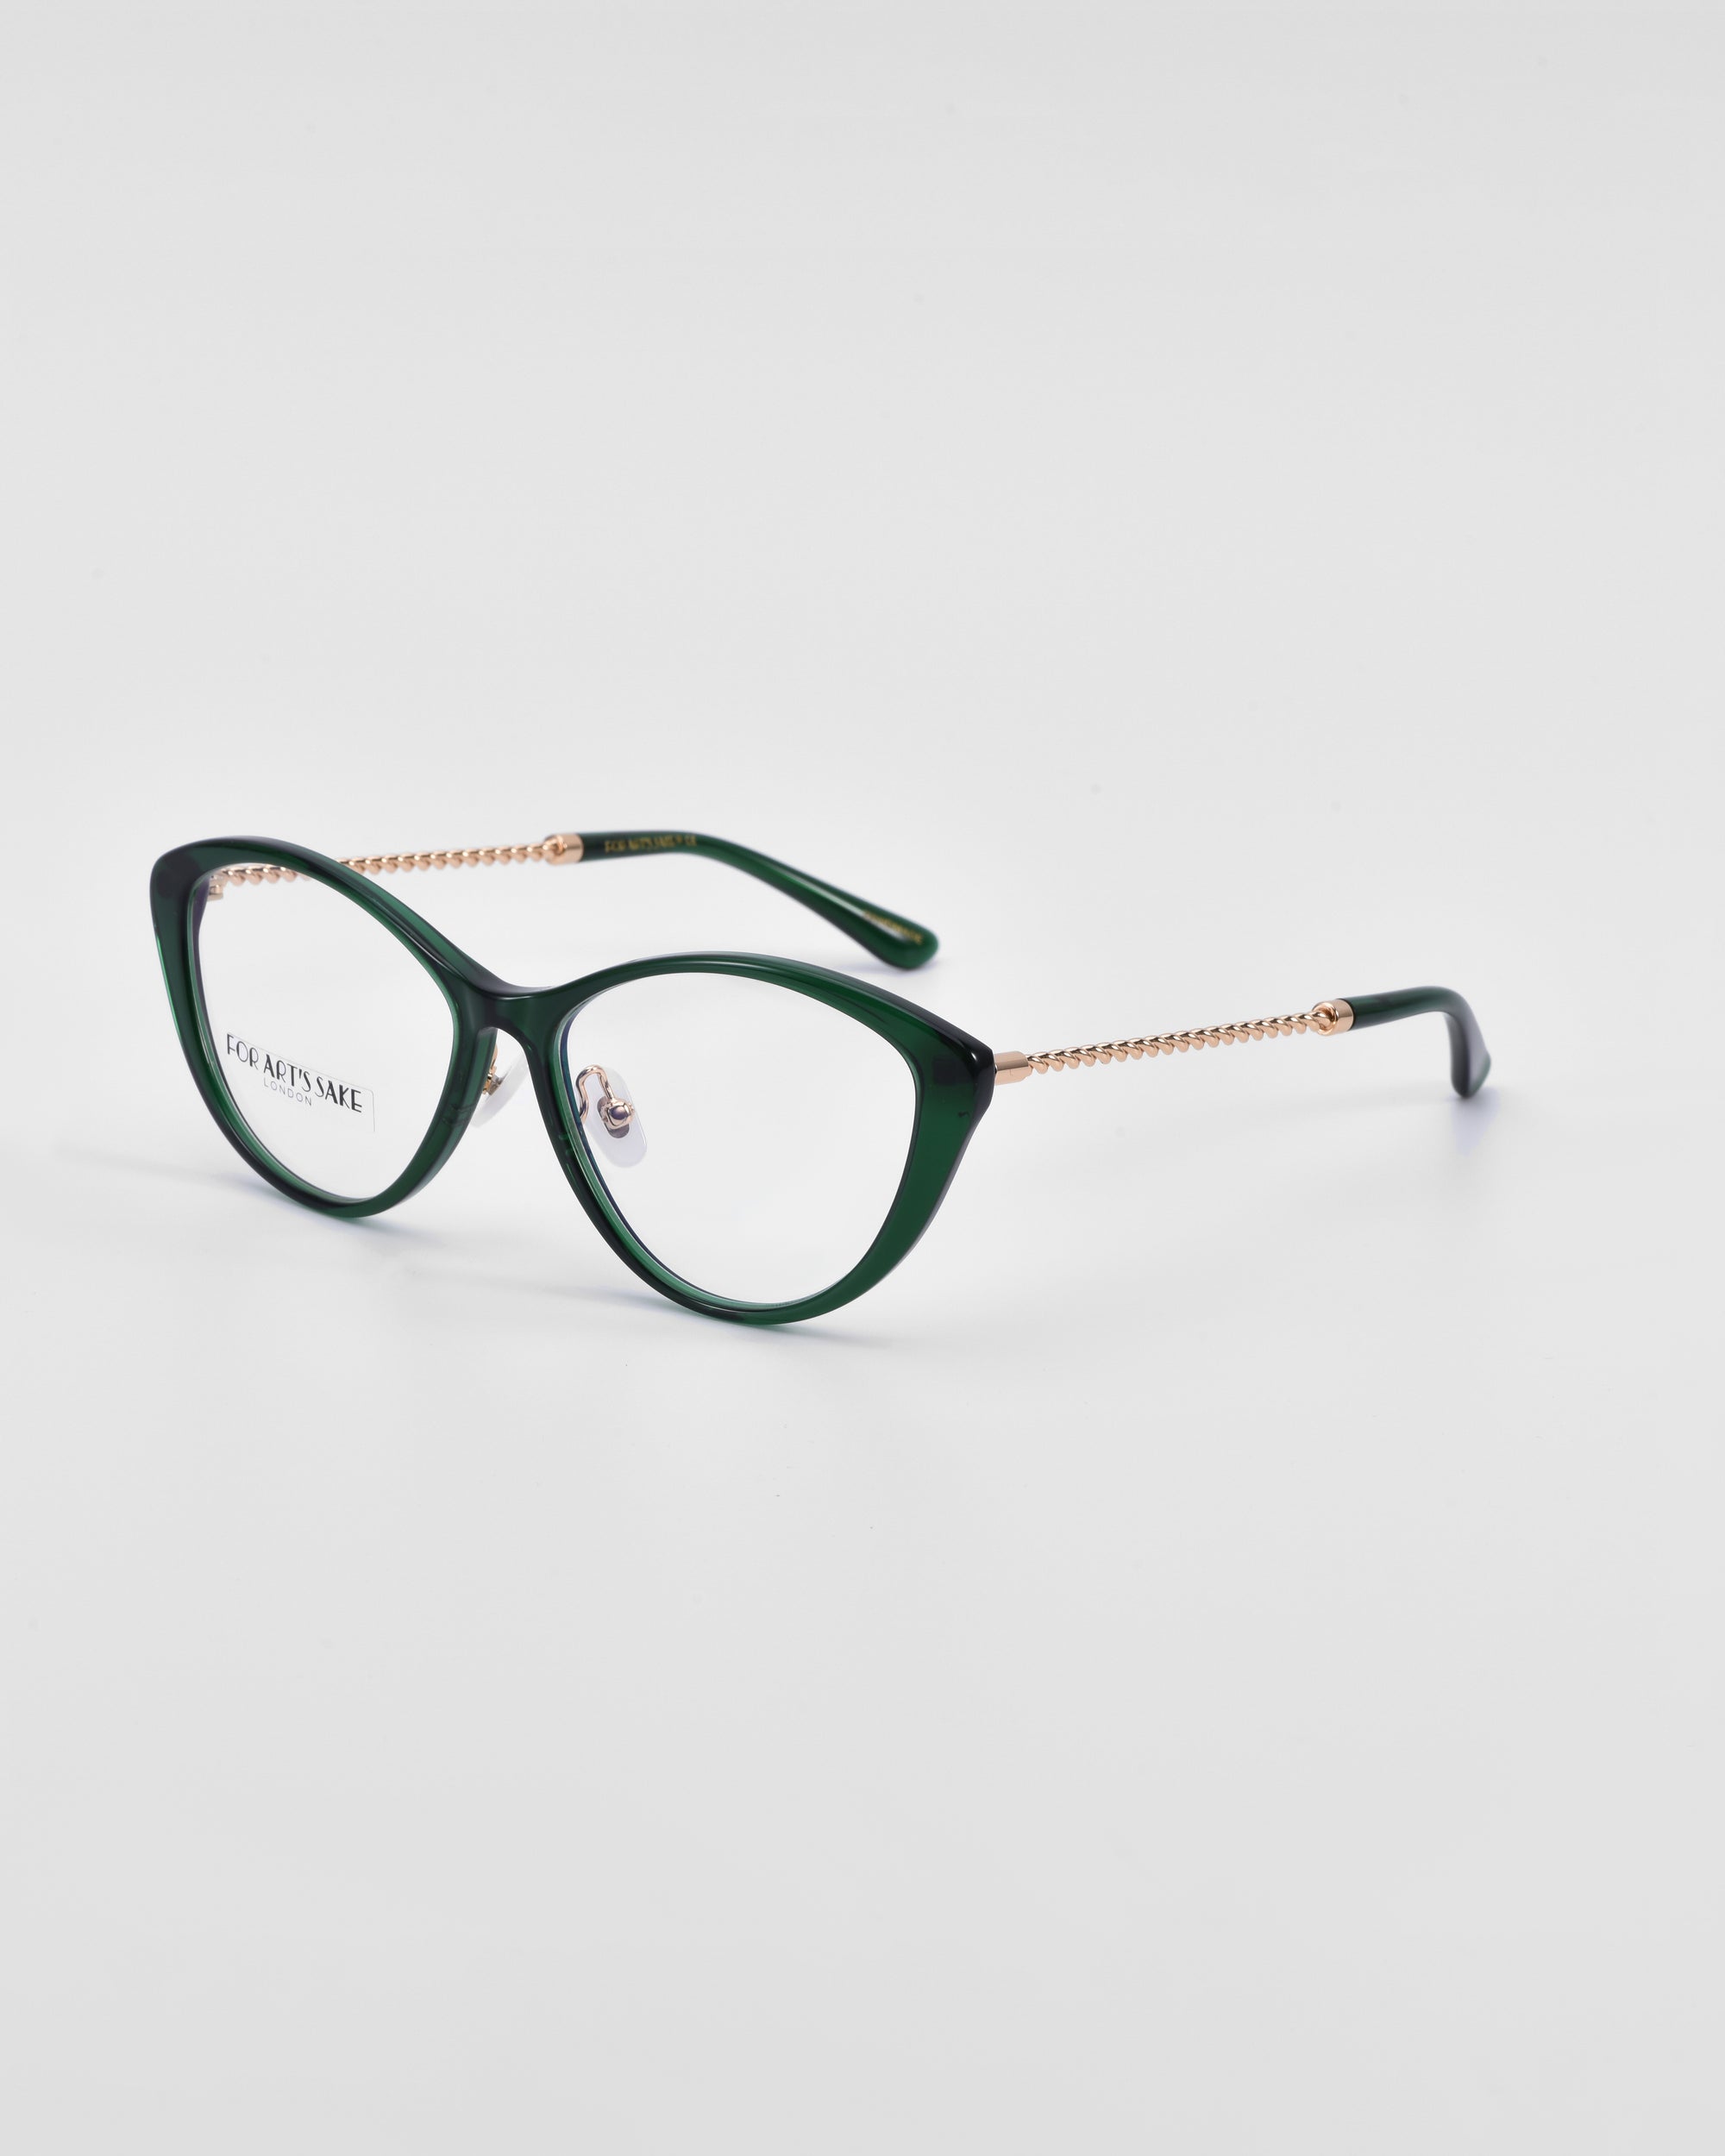 A pair of dark green Perla II eyeglasses with a cat-eye shape, positioned on a white background. The temples of the glasses are adorned with a gold chain-like pattern and 18-karat gold plating. The inside of the right lens is inscribed with &quot;For Art&#39;s Sake®,&quot; highlighting their exquisite optical design.